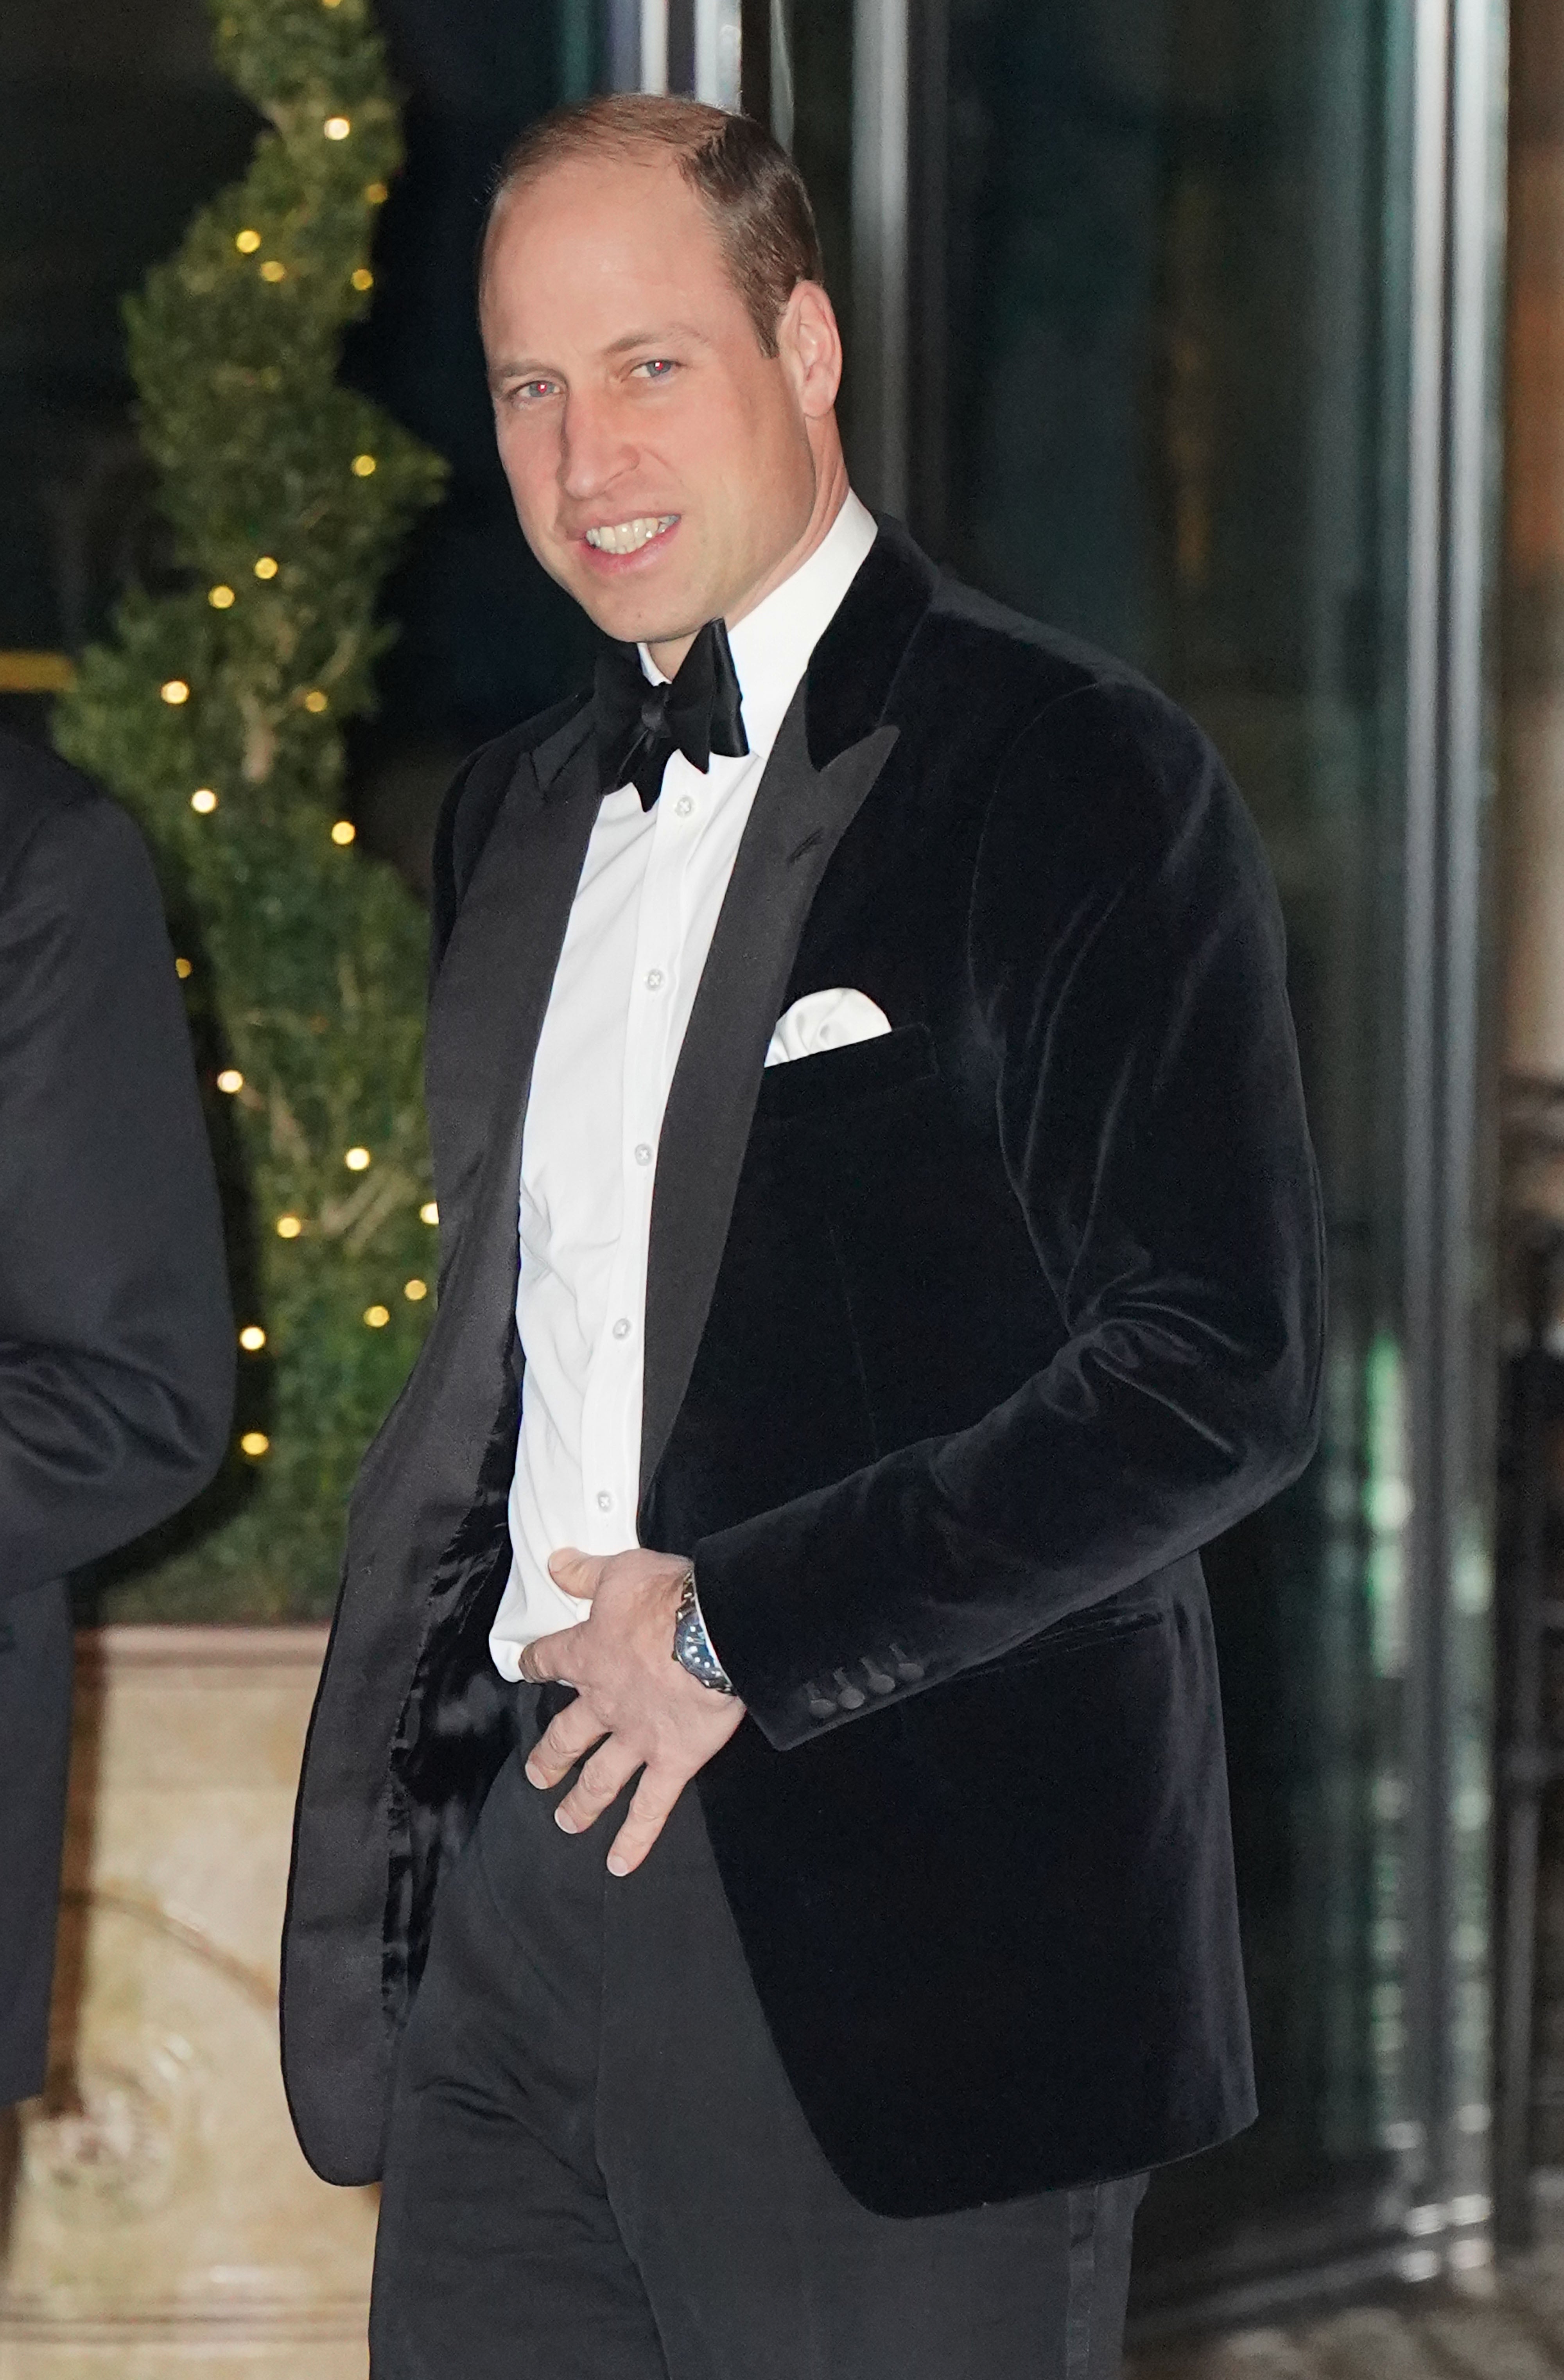 Prince William stops for photographers at the entrance to the gala dinner